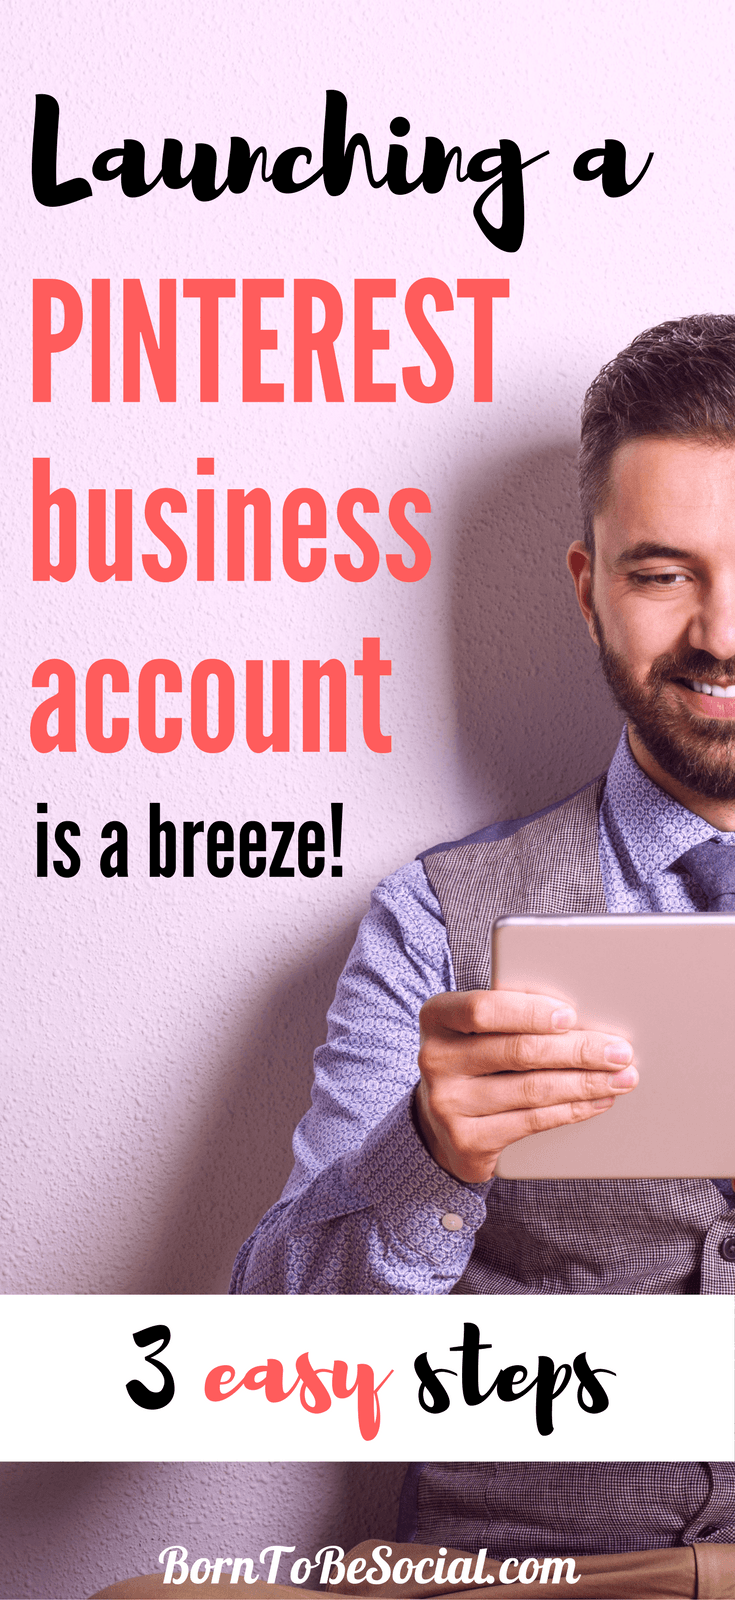 HOW TO CREATE YOUR PINTEREST BUSINESS ACCOUNT IN 3 EASY STEPS - If you have a Pinterest account that you use for business, a Pinterest Business Account is an absolute must. It’s super easy to create or convert, it’s free to use and offers valuable insights and additional functionality. Let's go! | via @BornToBeSocial, Pinterest Marketing & Consulting | Your Pinterest Partner